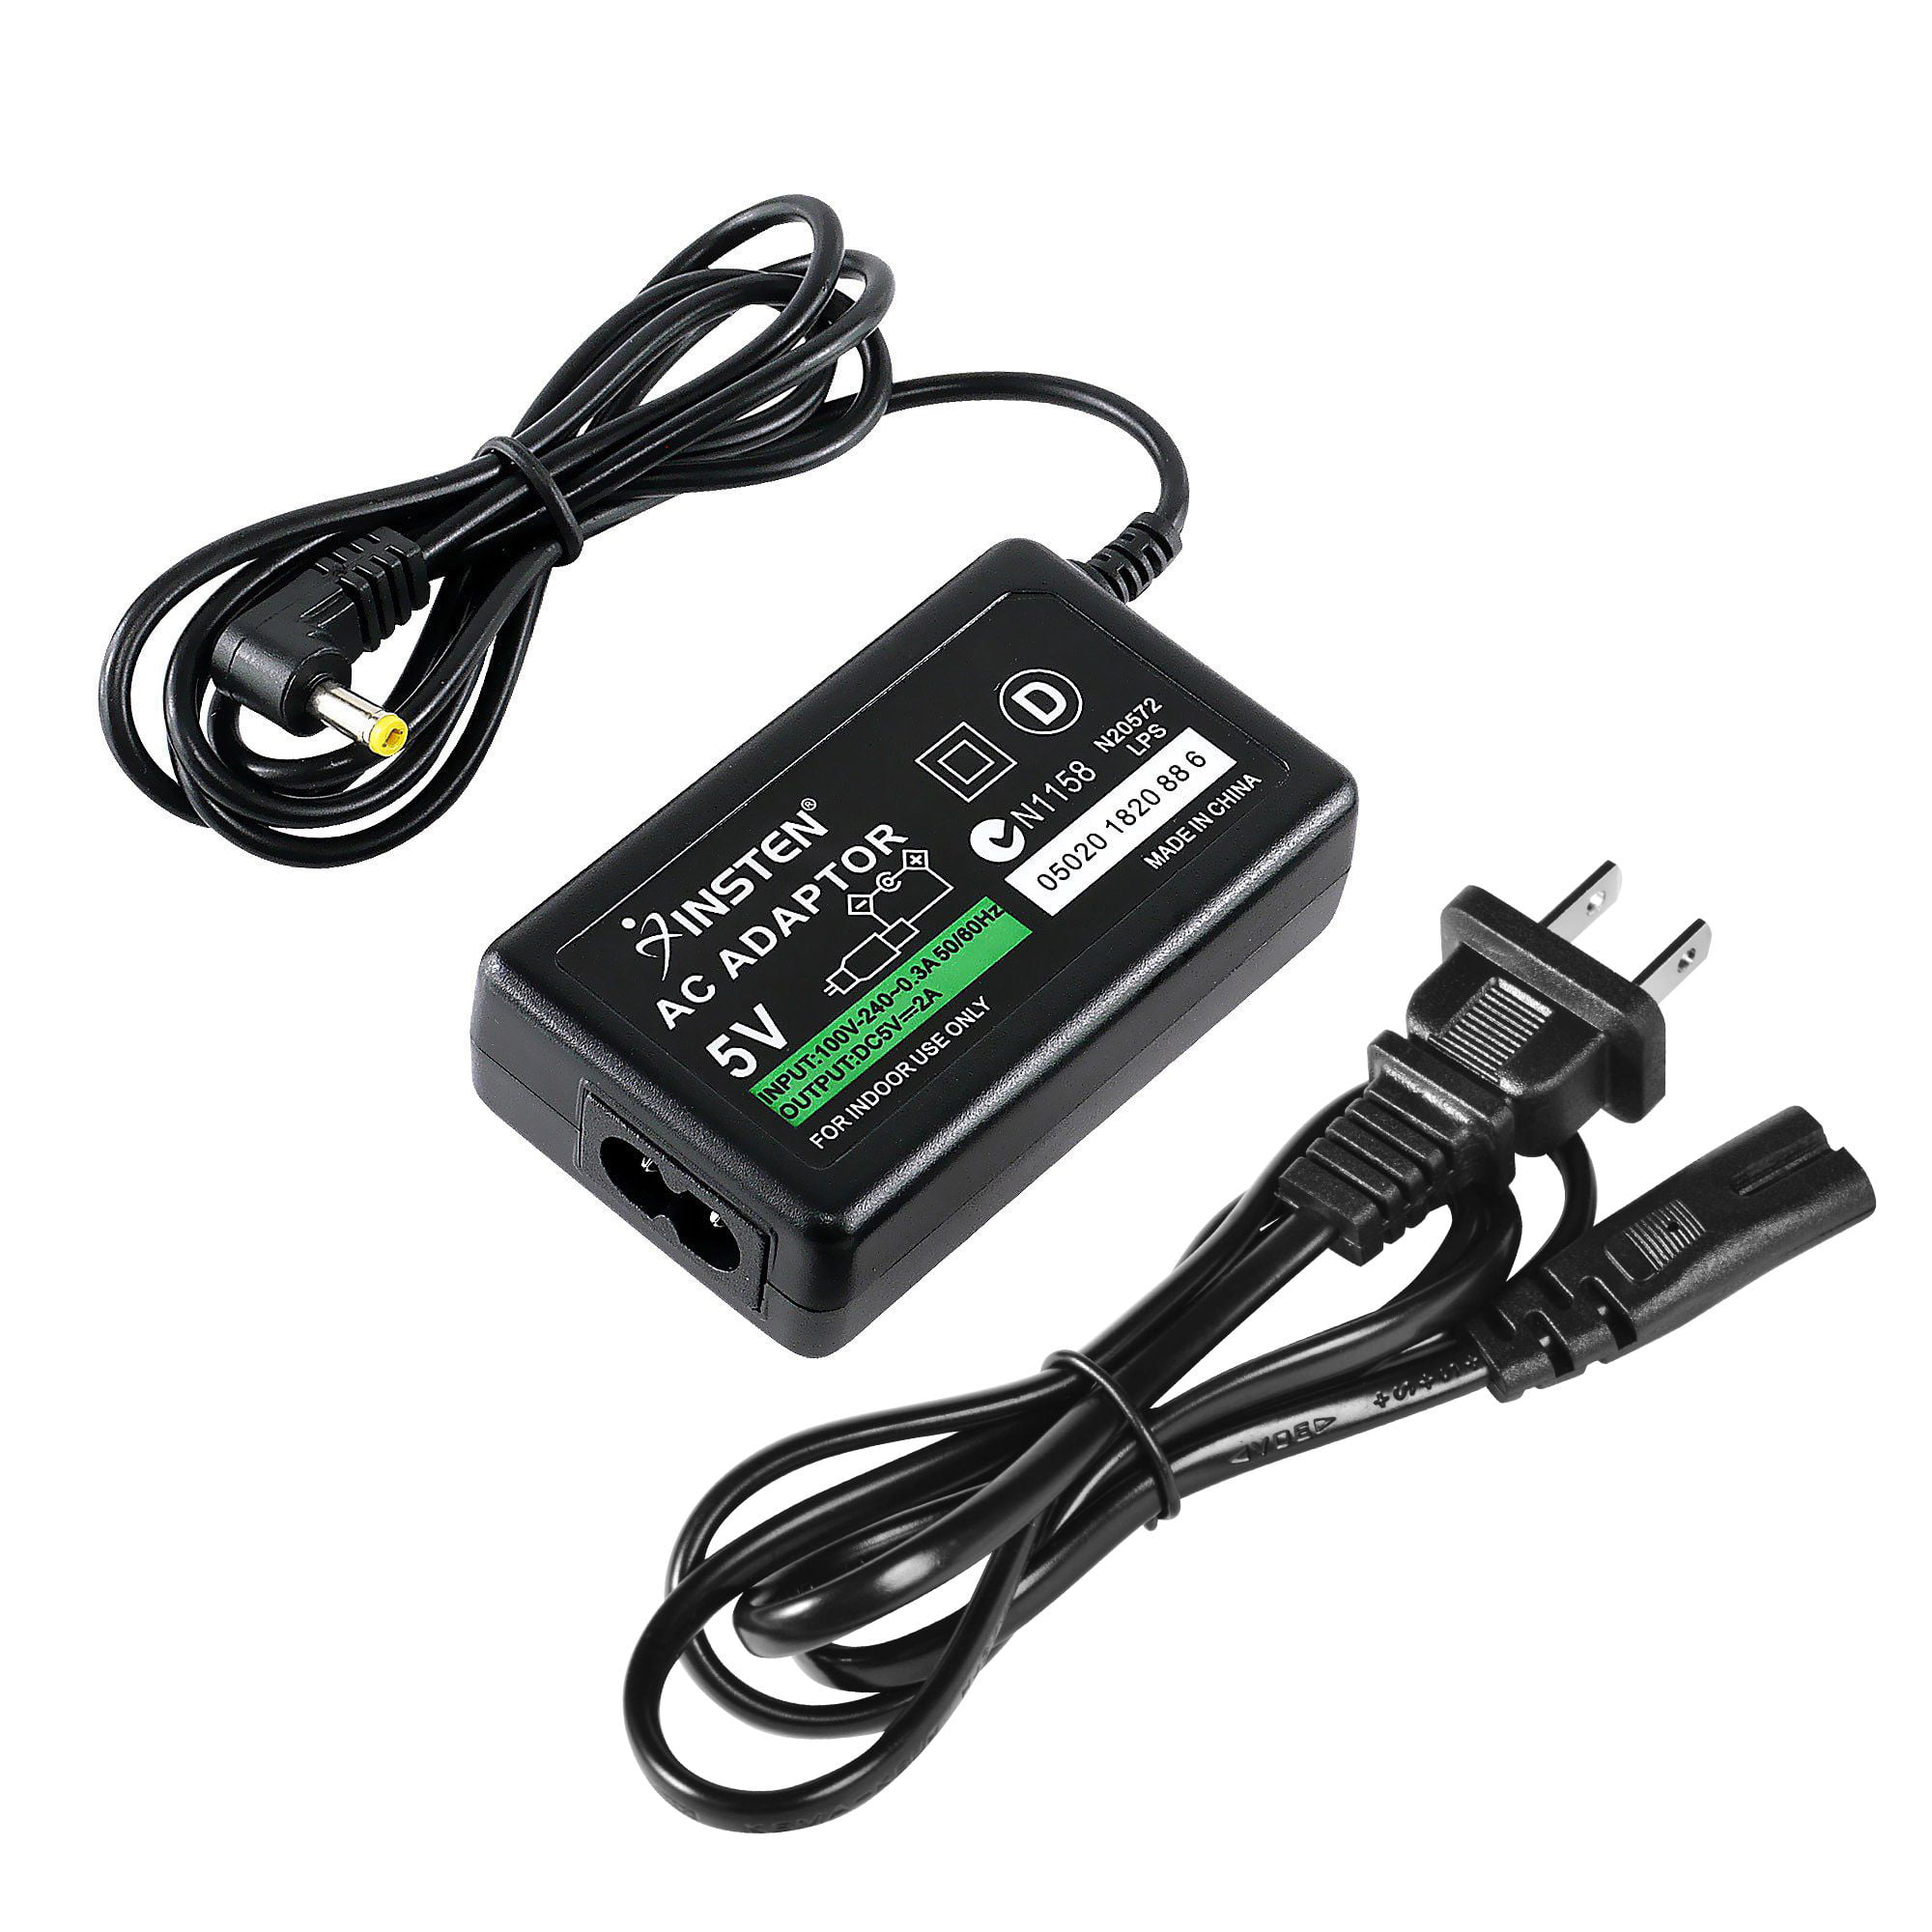 Insten Travel Charger AC Power Supply Outlet Adapter For Sony PSP (Fit ...